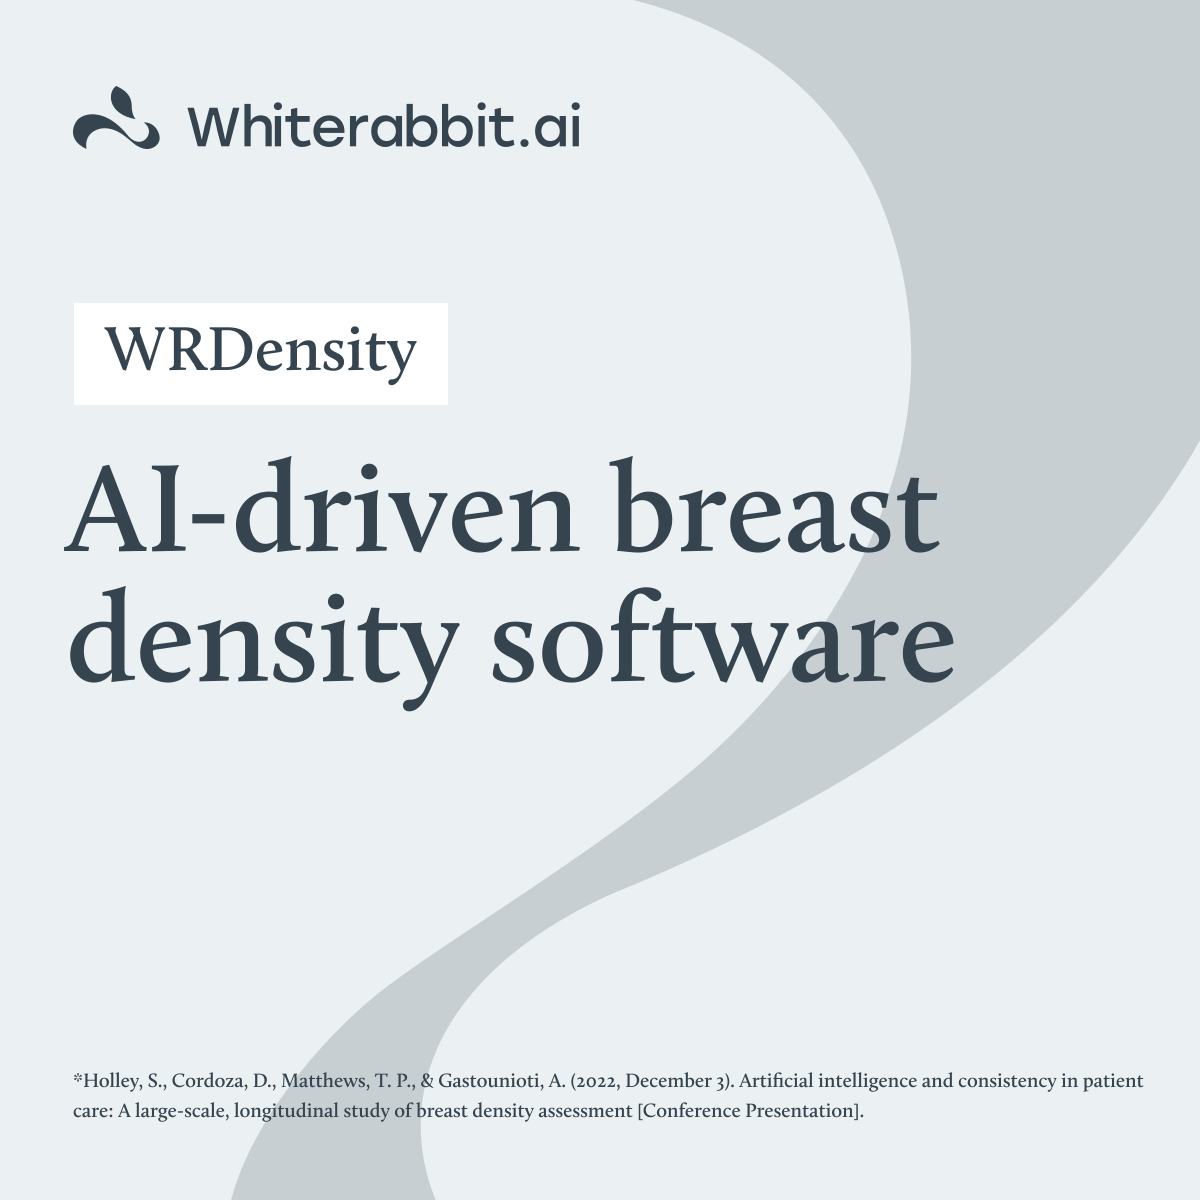 WRDensity is our #AI-driven #breastdensity software that assists radiologists in interpreting breast density to create uniformity of density assessment at the practice level. Learn more: whiterabbit.ai/products/wrden… #radiology